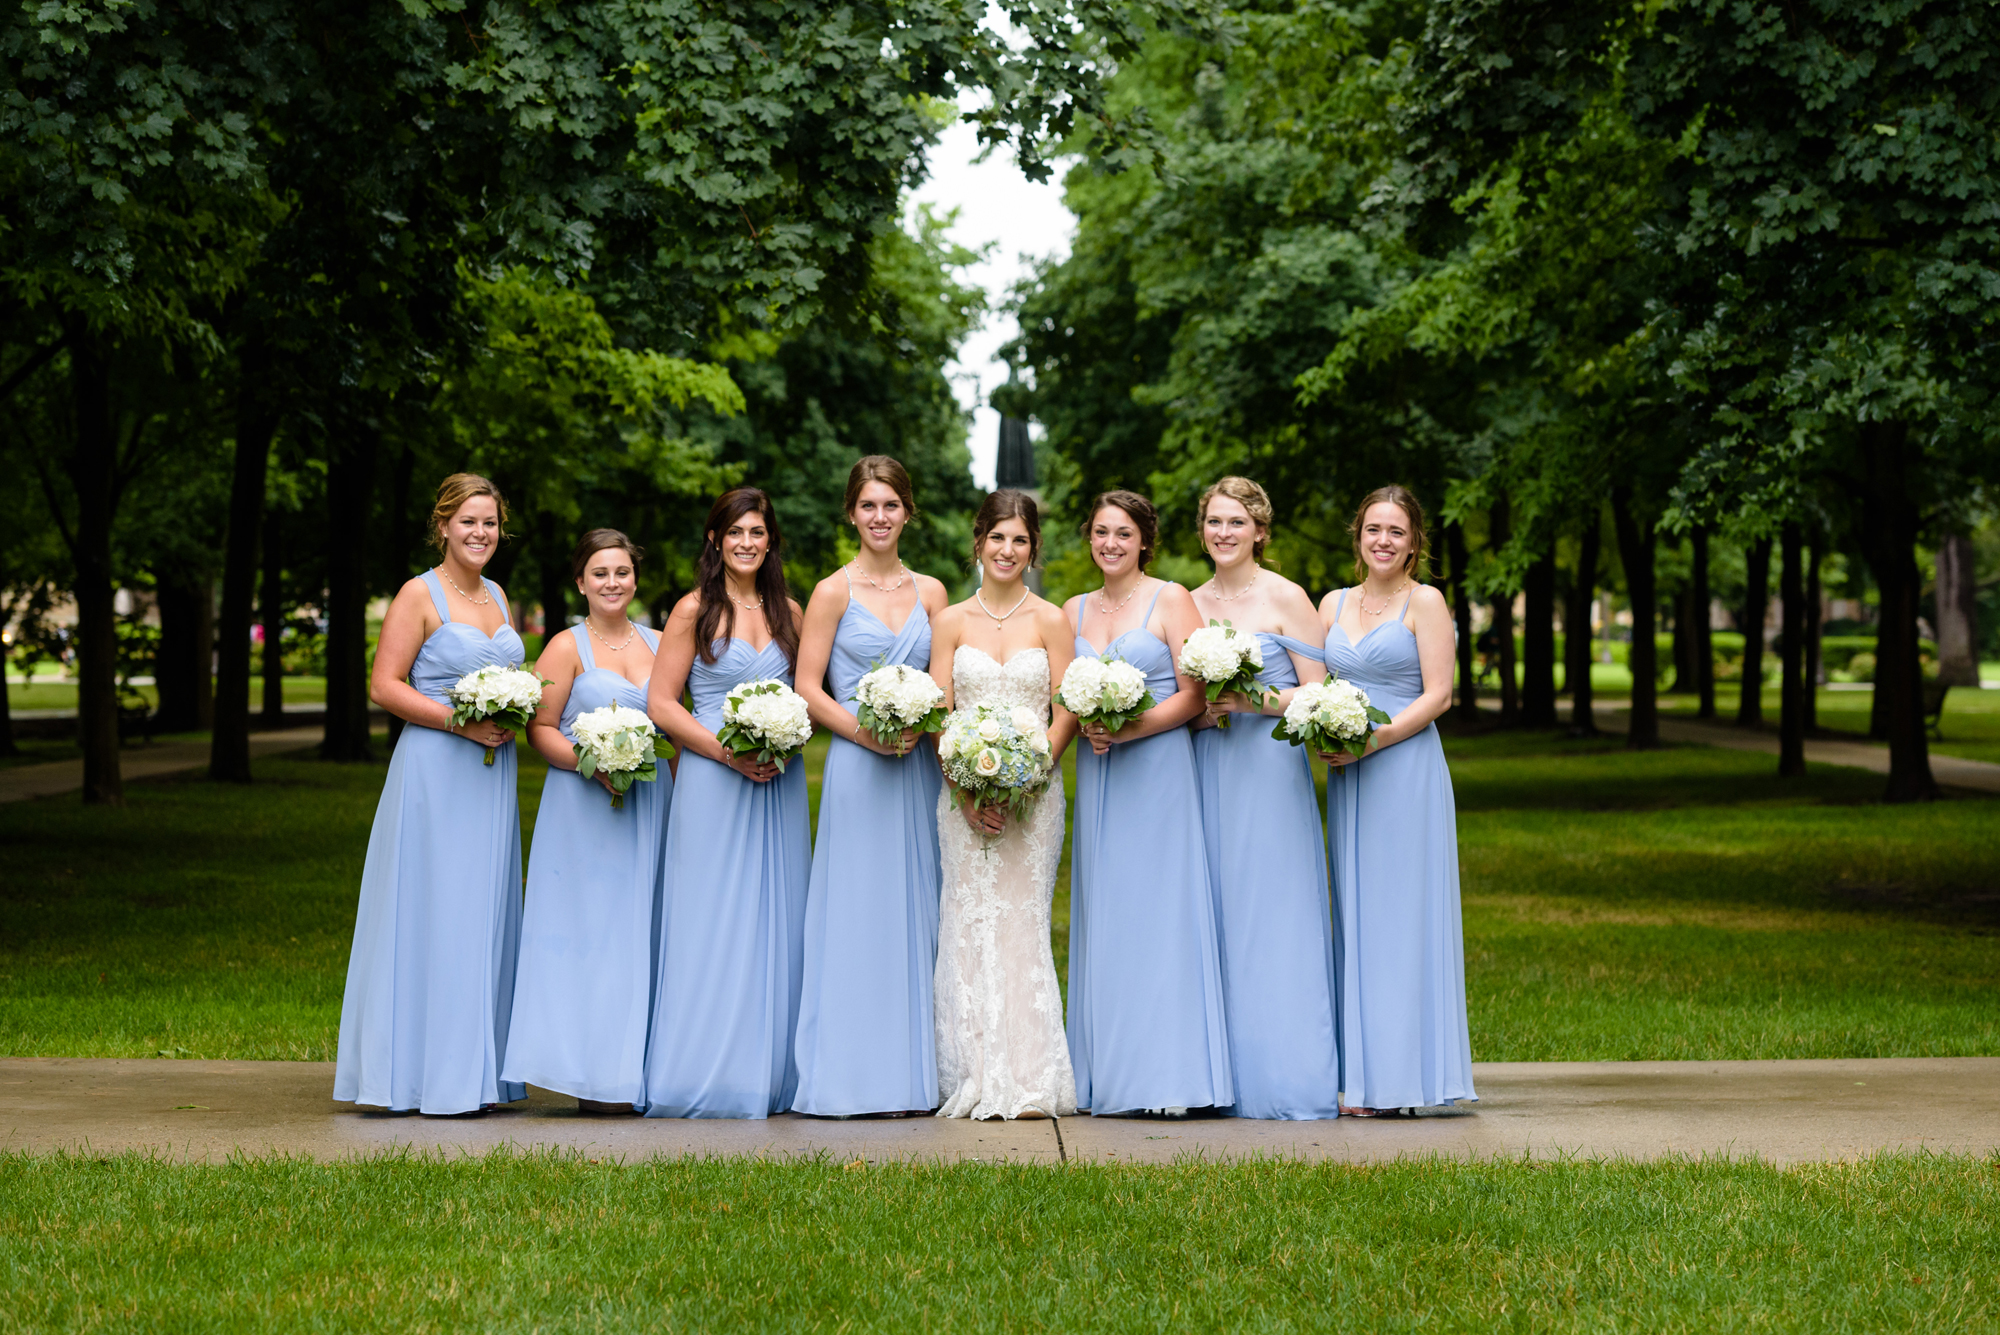 Bridesmaid on God Quad after a wedding ceremony at the Basilica of the Sacred Heart on the campus of the University of Notre Dame